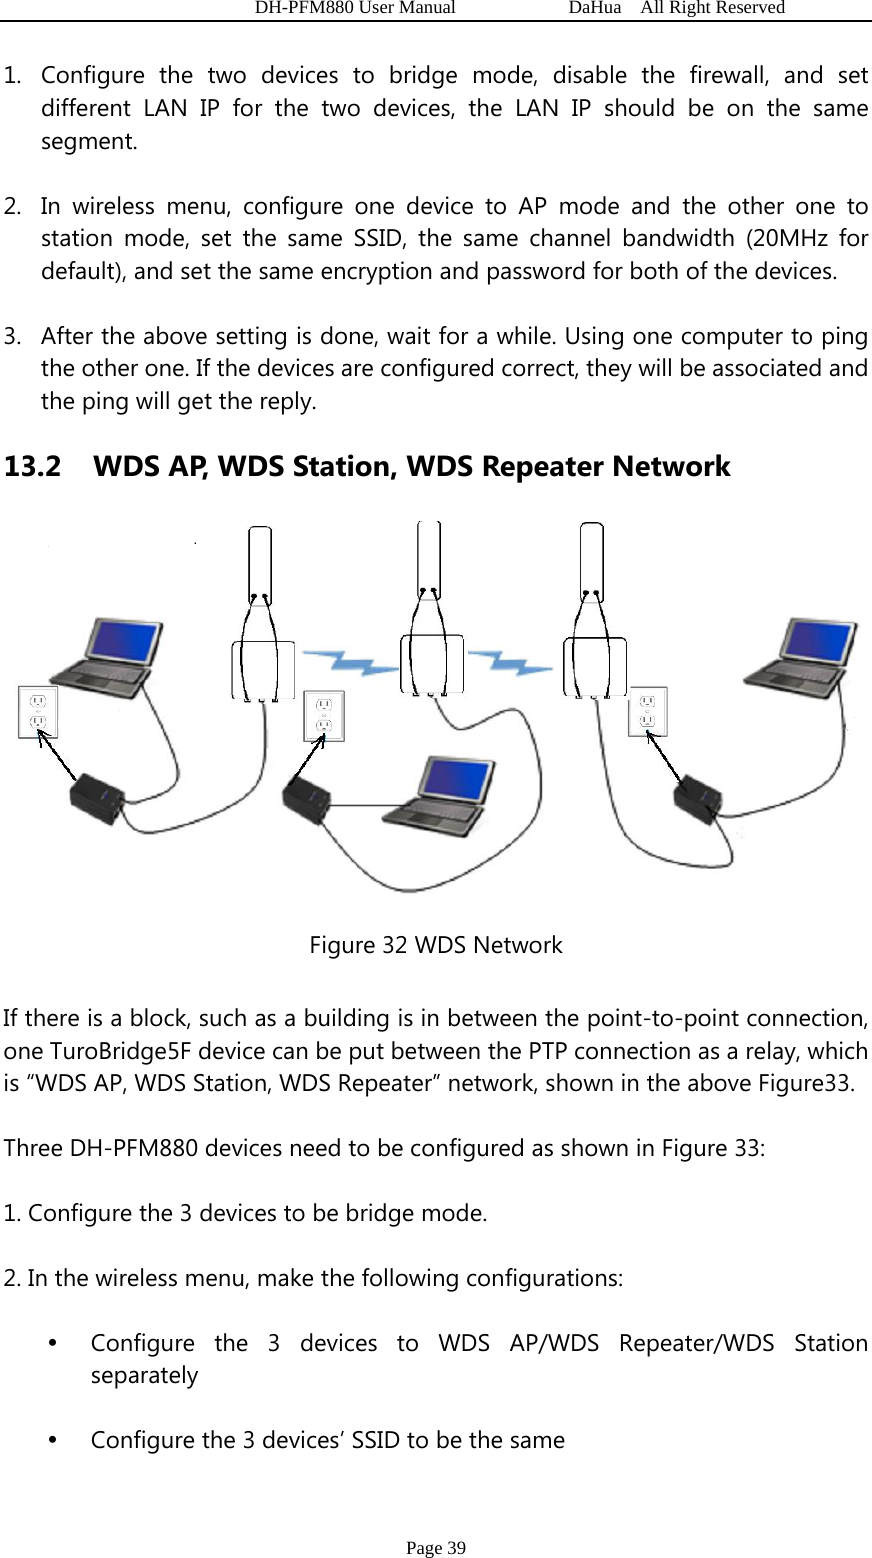   DH-PFM880 User Manual            DaHua  All Right Reserved Page 39 1. Configure the two devices to bridge mode, disable the firewall, and set different LAN IP for the two devices, the LAN IP should be on the same segment. 2. In wireless menu, configure one device to AP mode and the other one to station mode, set the same SSID, the same channel bandwidth (20MHz for default), and set the same encryption and password for both of the devices.   3. After the above setting is done, wait for a while. Using one computer to ping the other one. If the devices are configured correct, they will be associated and the ping will get the reply. 13.2   WDS AP, WDS Station, WDS Repeater Network  Figure 32 WDS Network If there is a block, such as a building is in between the point-to-point connection, one TuroBridge5F device can be put between the PTP connection as a relay, which is “WDS AP, WDS Station, WDS Repeater” network, shown in the above Figure33. Three DH-PFM880 devices need to be configured as shown in Figure 33: 1. Configure the 3 devices to be bridge mode. 2. In the wireless menu, make the following configurations: y Configure the 3 devices to WDS AP/WDS Repeater/WDS Station separately y Configure the 3 devices’ SSID to be the same 